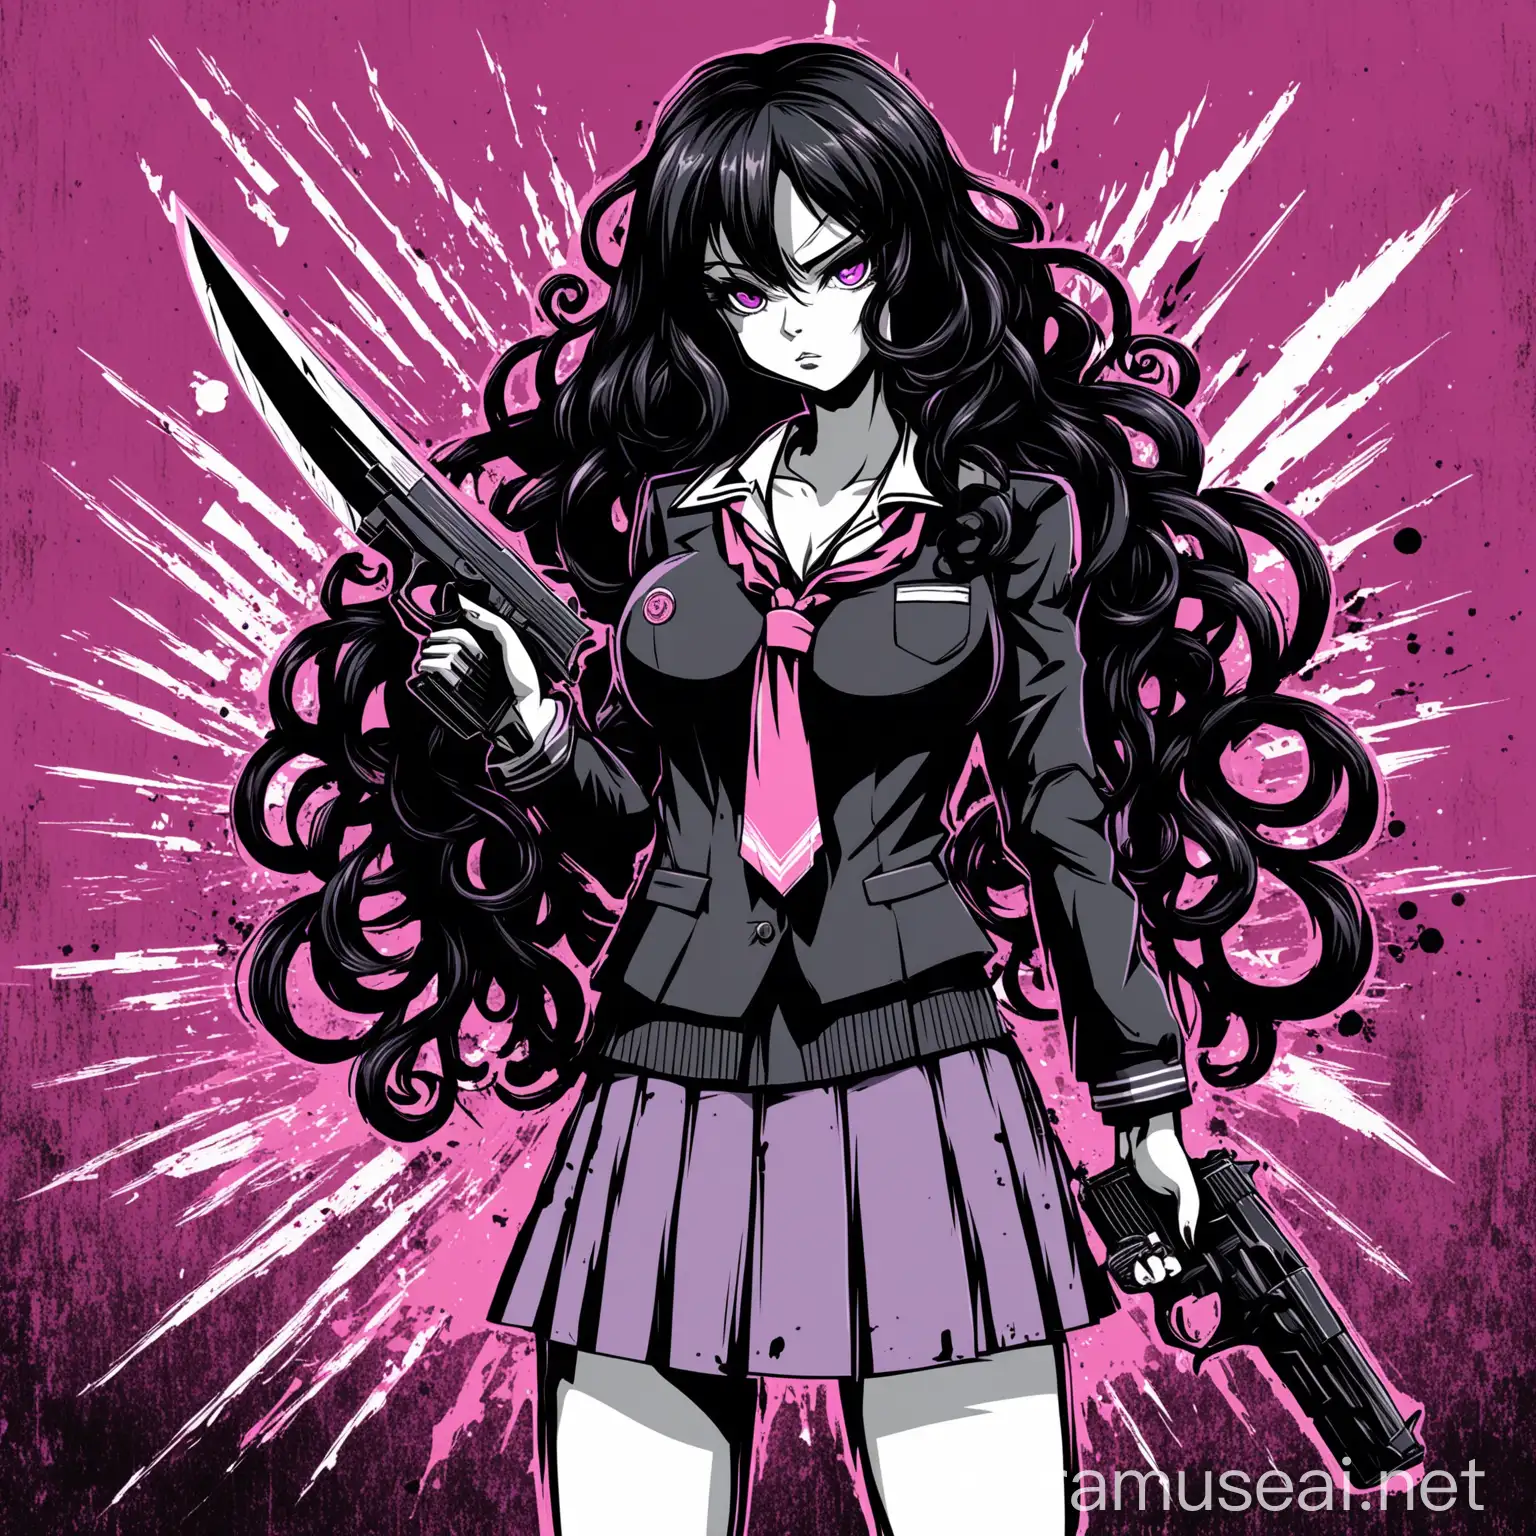 Anime Girl with Long Black Curly Hair Holding Gun and Knife in Monochrome Palette